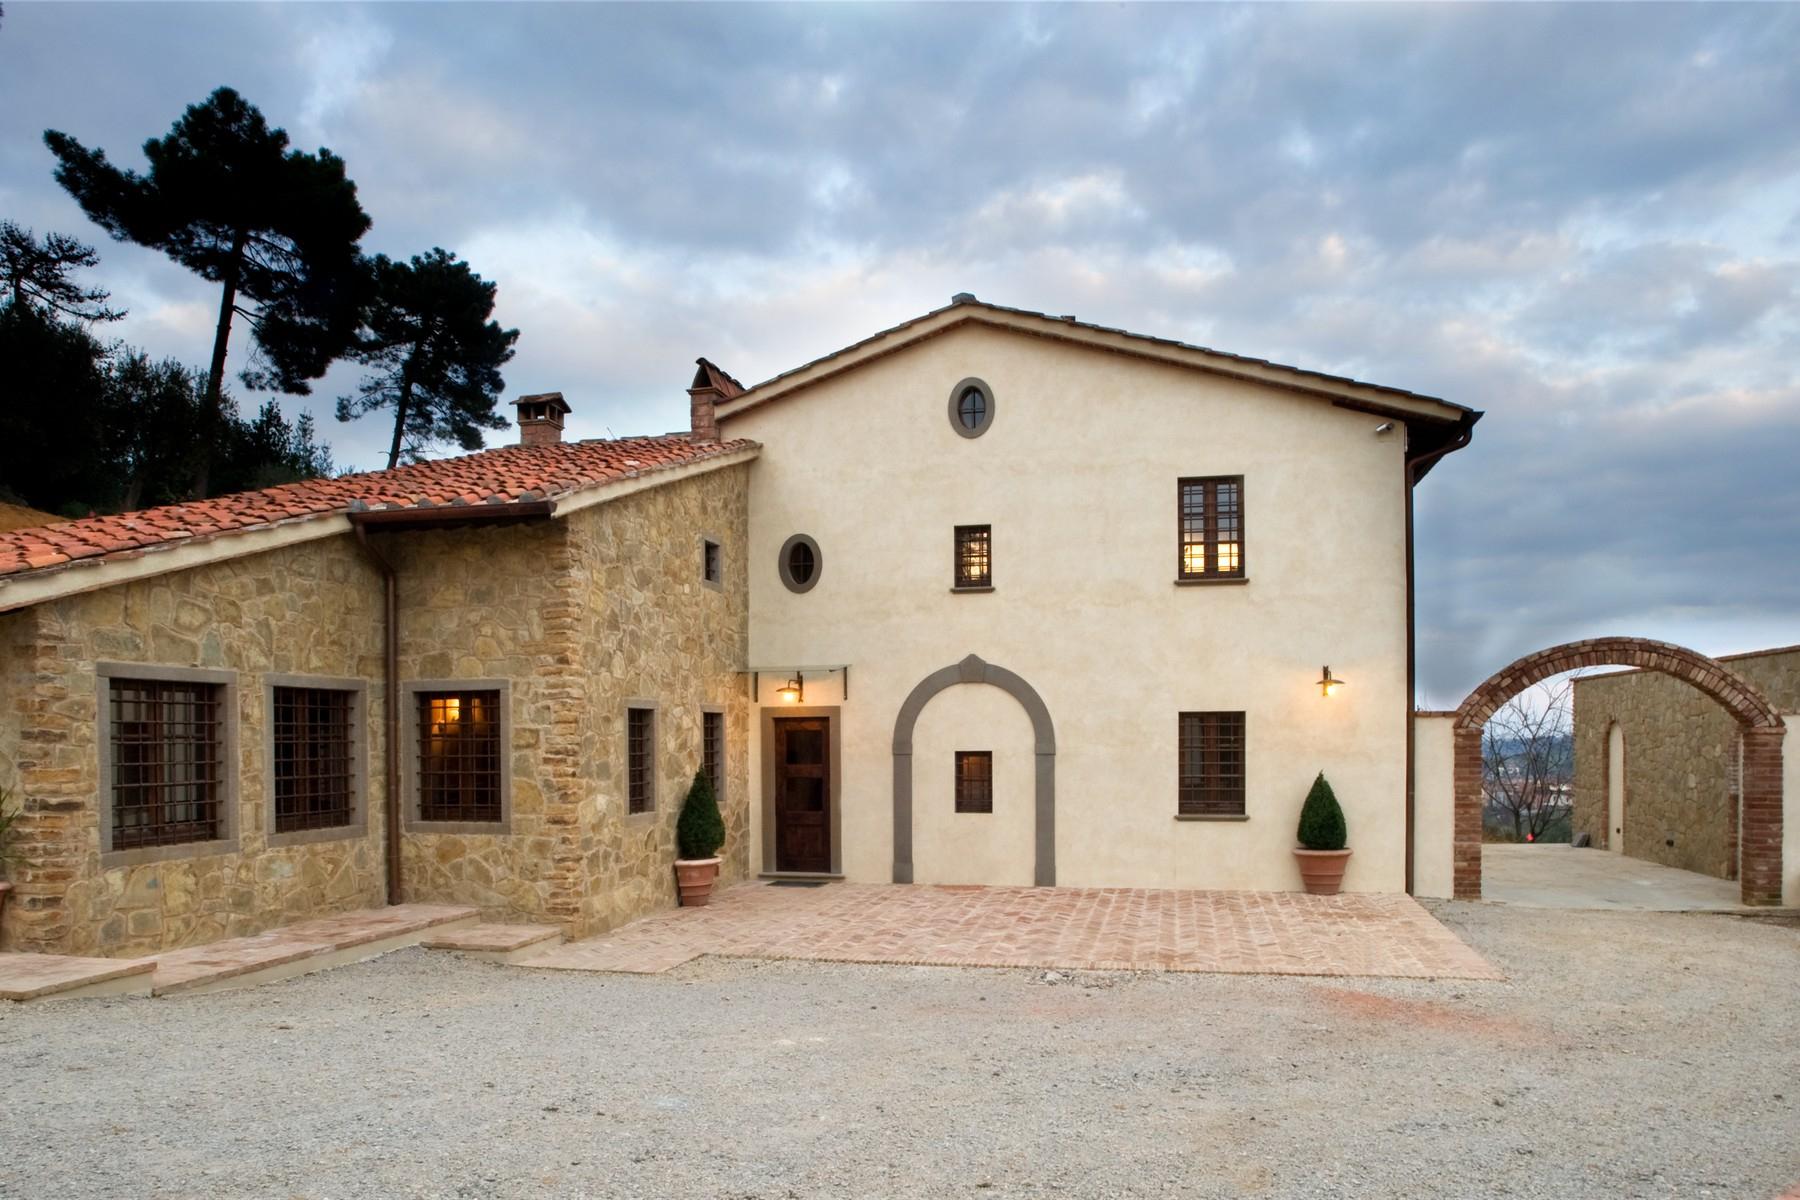 Farmhouse for sale in the Tuscan hills - 3